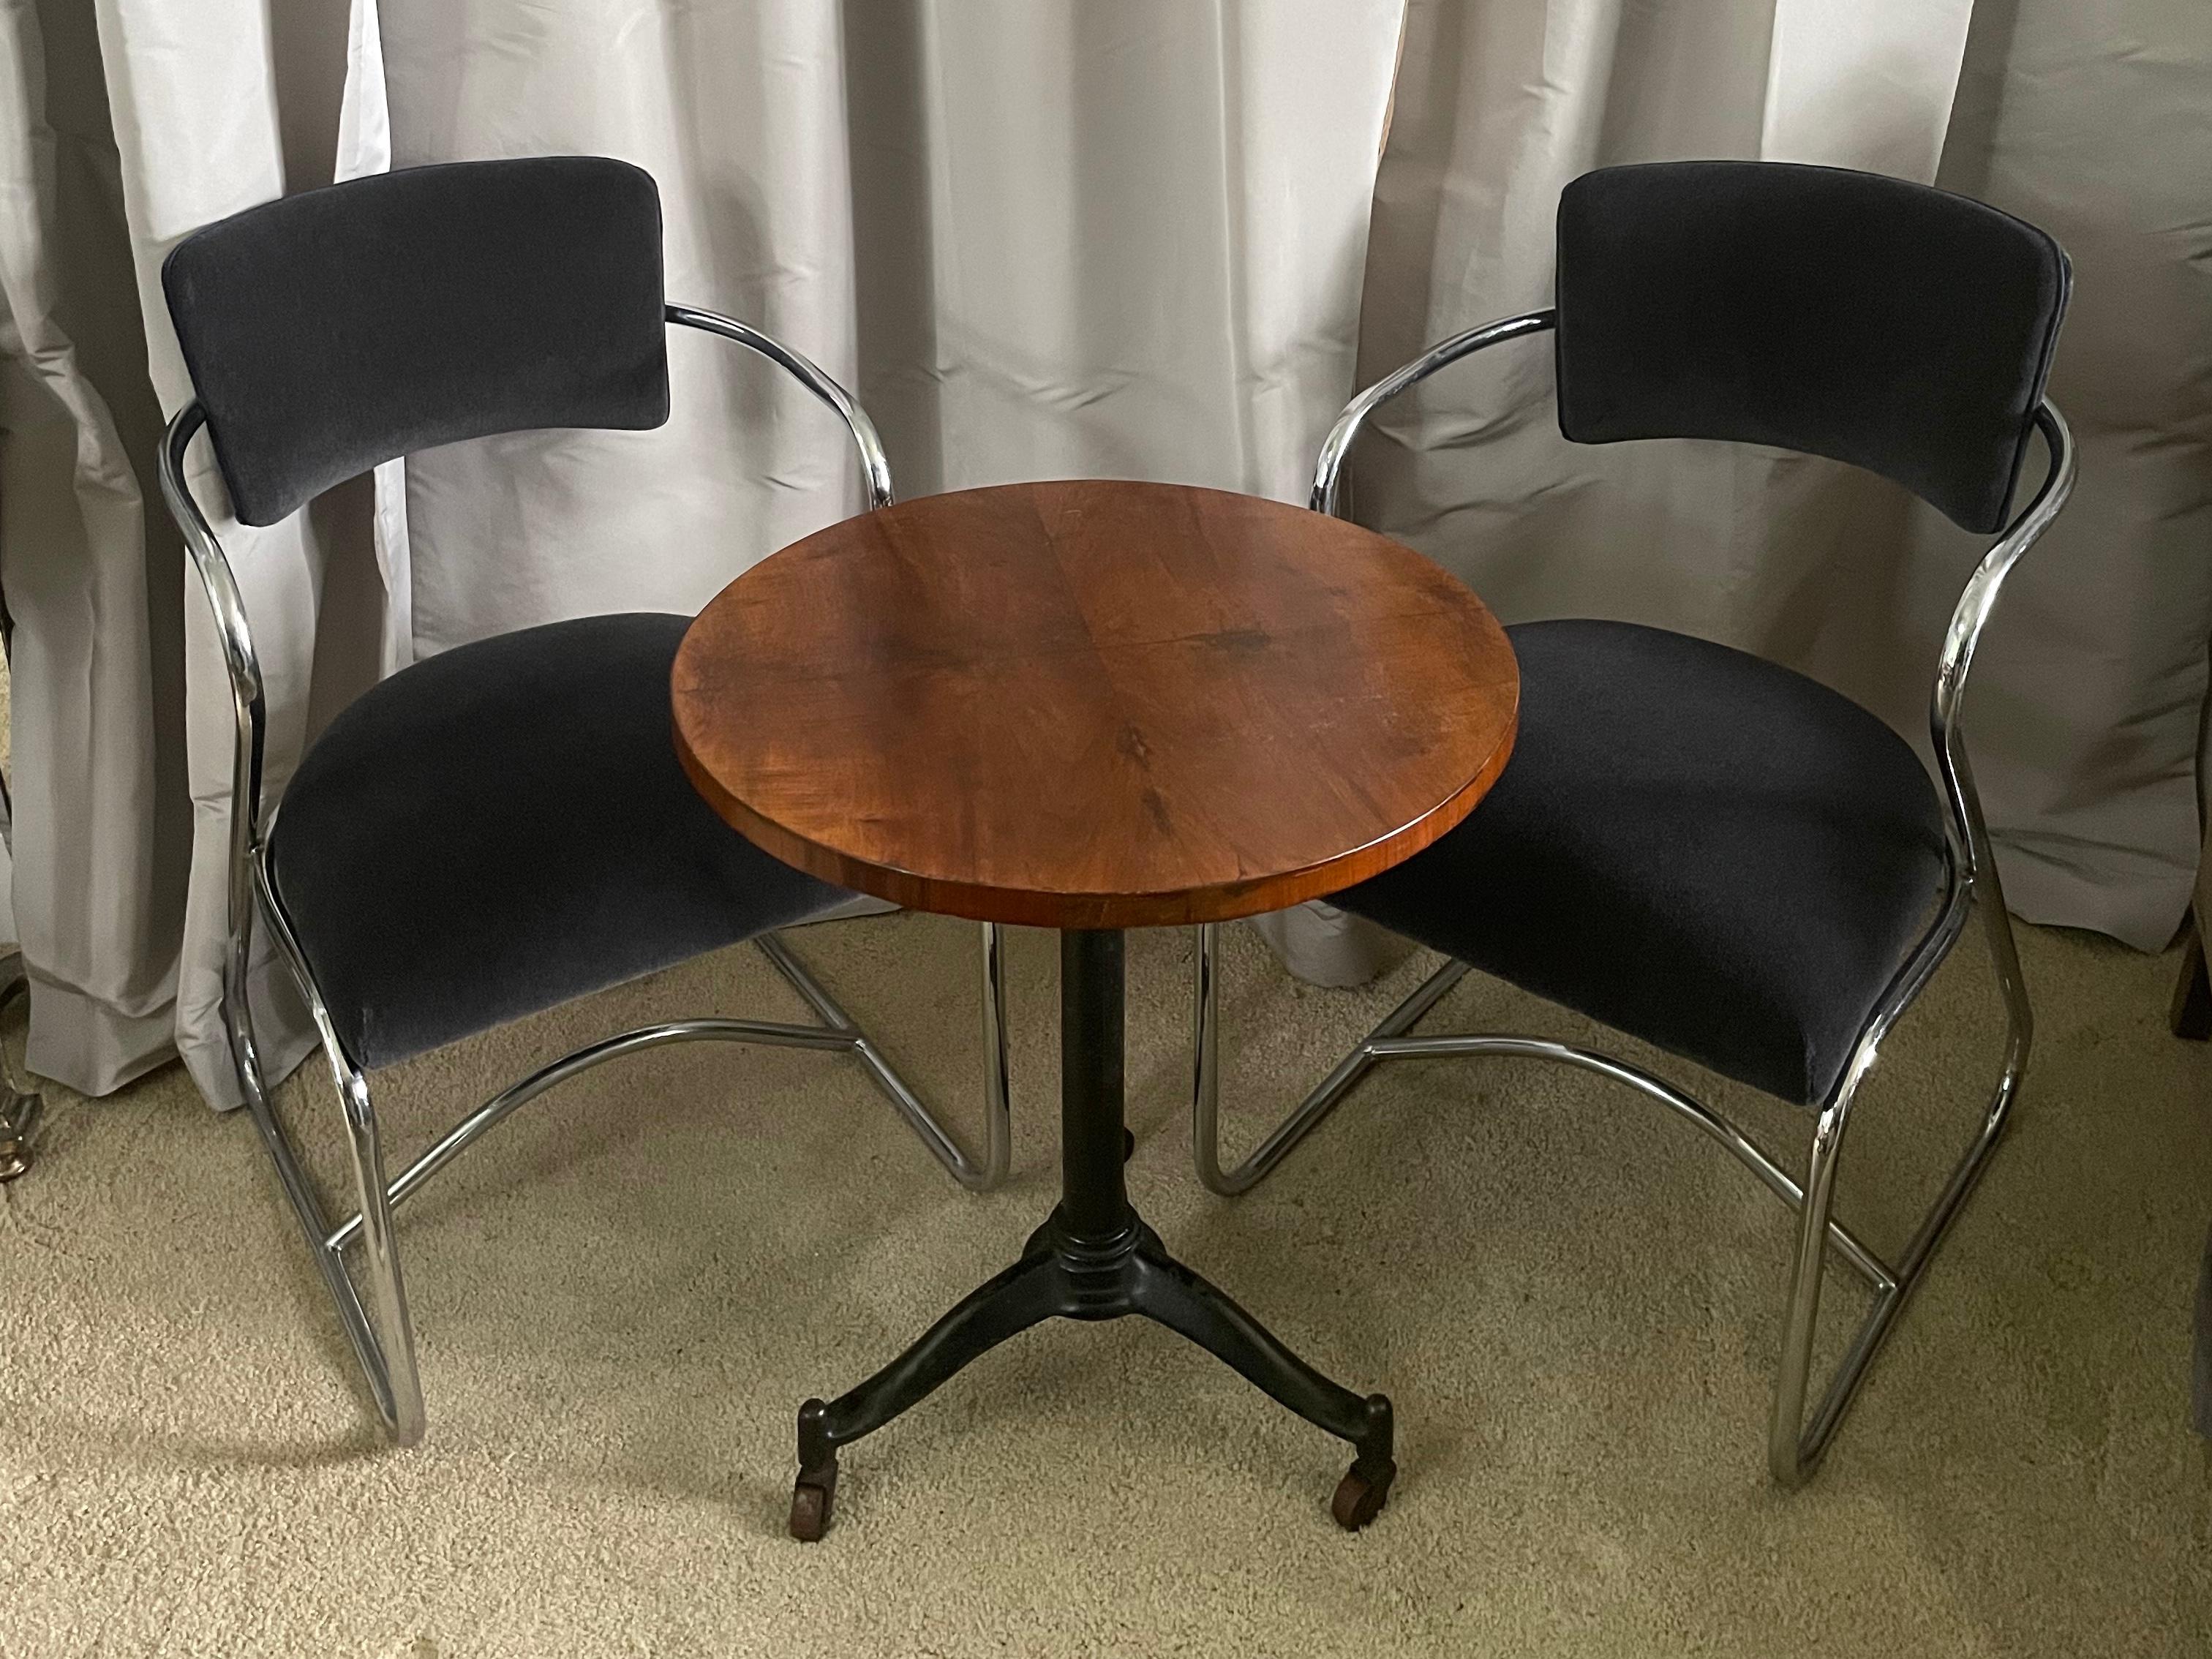 Kem Weber chrome and mohair thirties armchairs. Great condition and newly reupholstered in steel blue mohair, these small scale chrome open armchairs are versatile seating for breakfast card table or in front hall. United States, circa